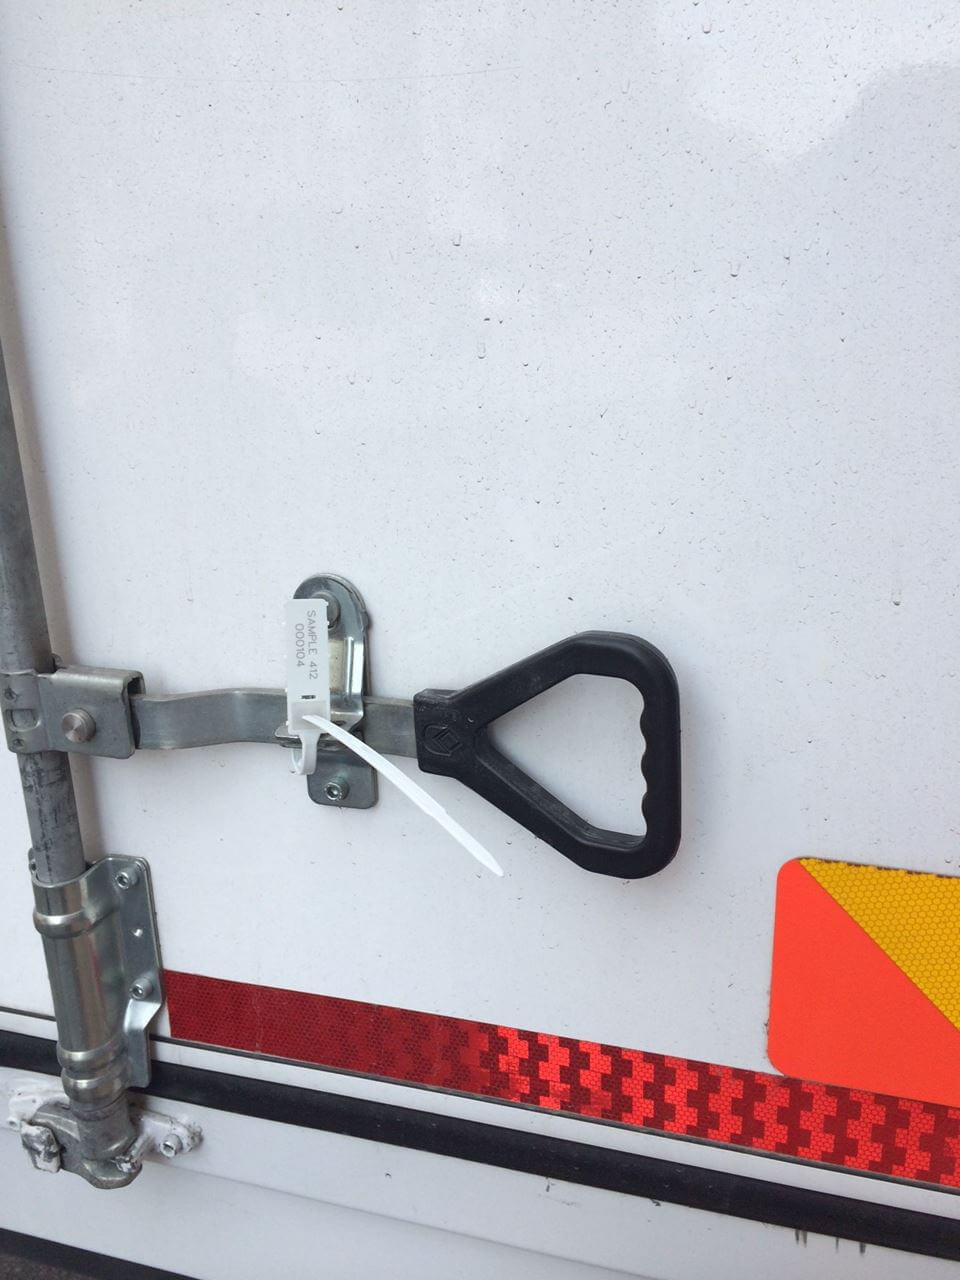 UNI412 security seal on a truck